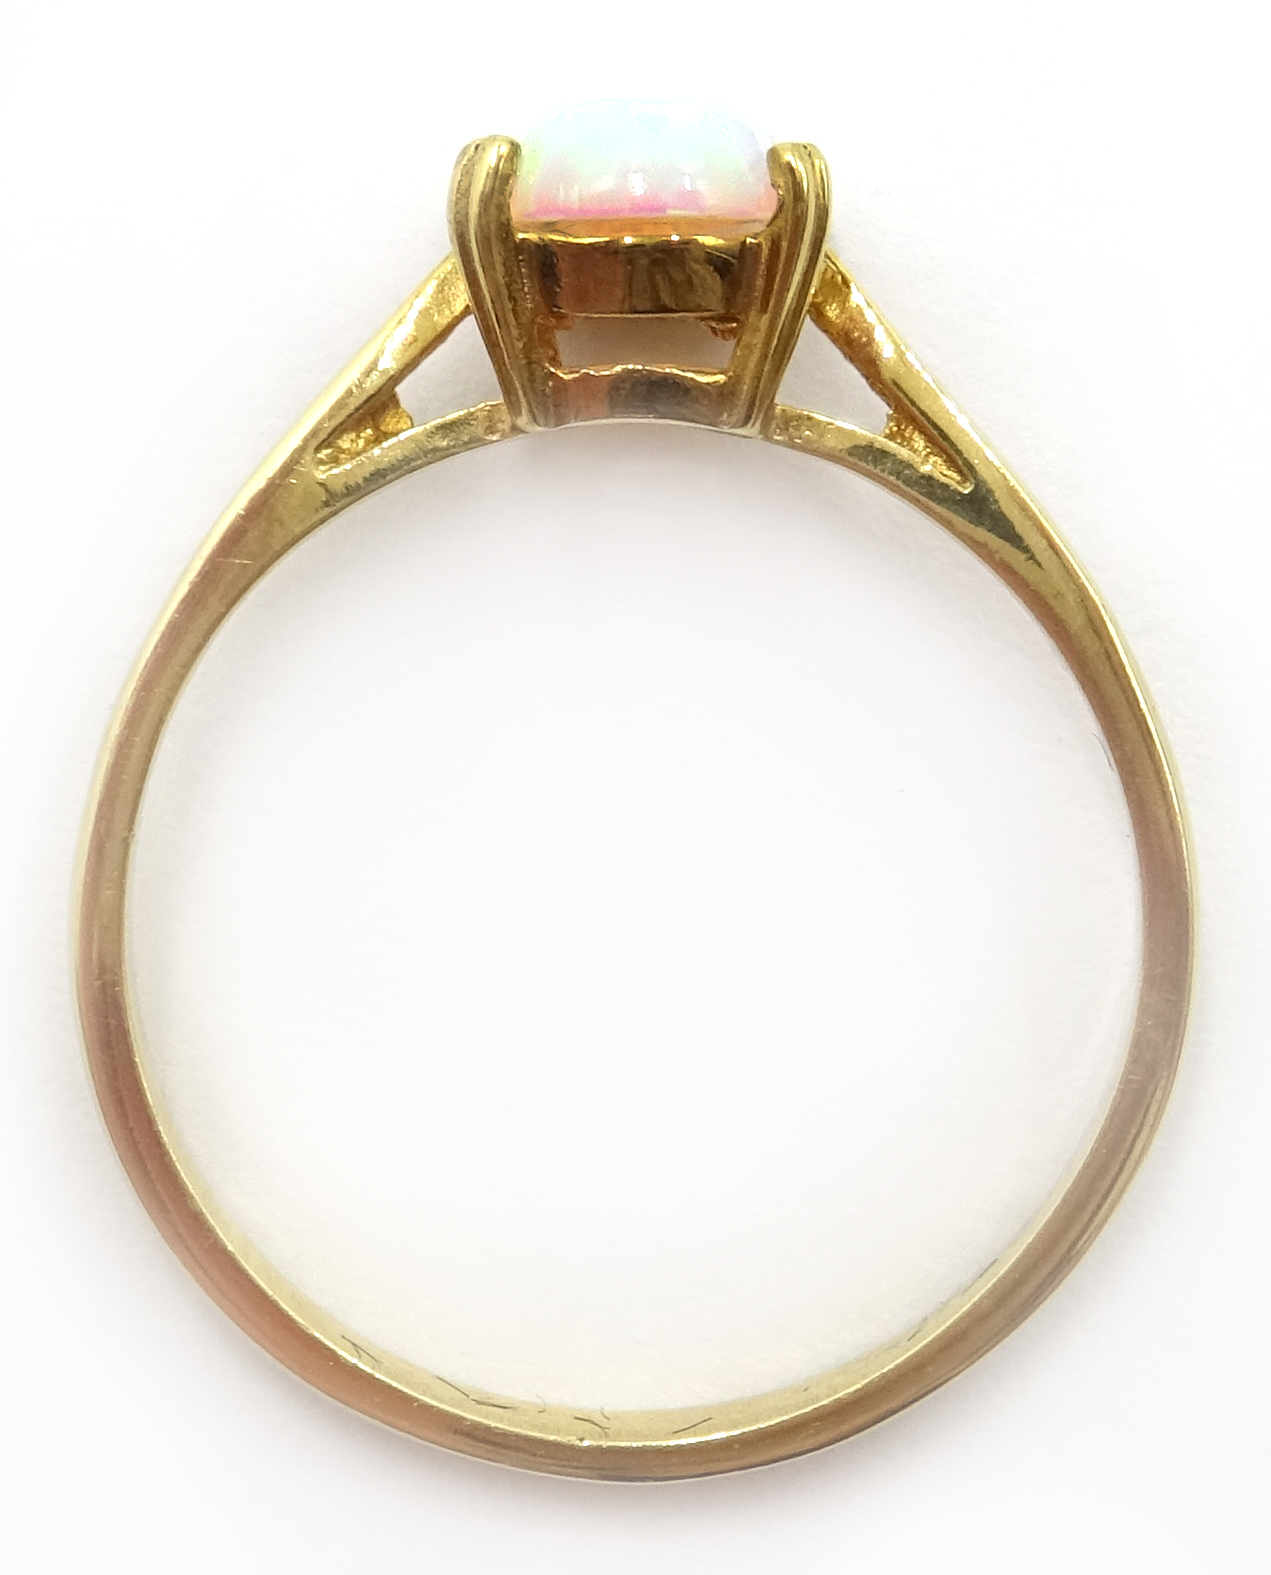 Silver-gilt single stone opal ring, - Image 3 of 3